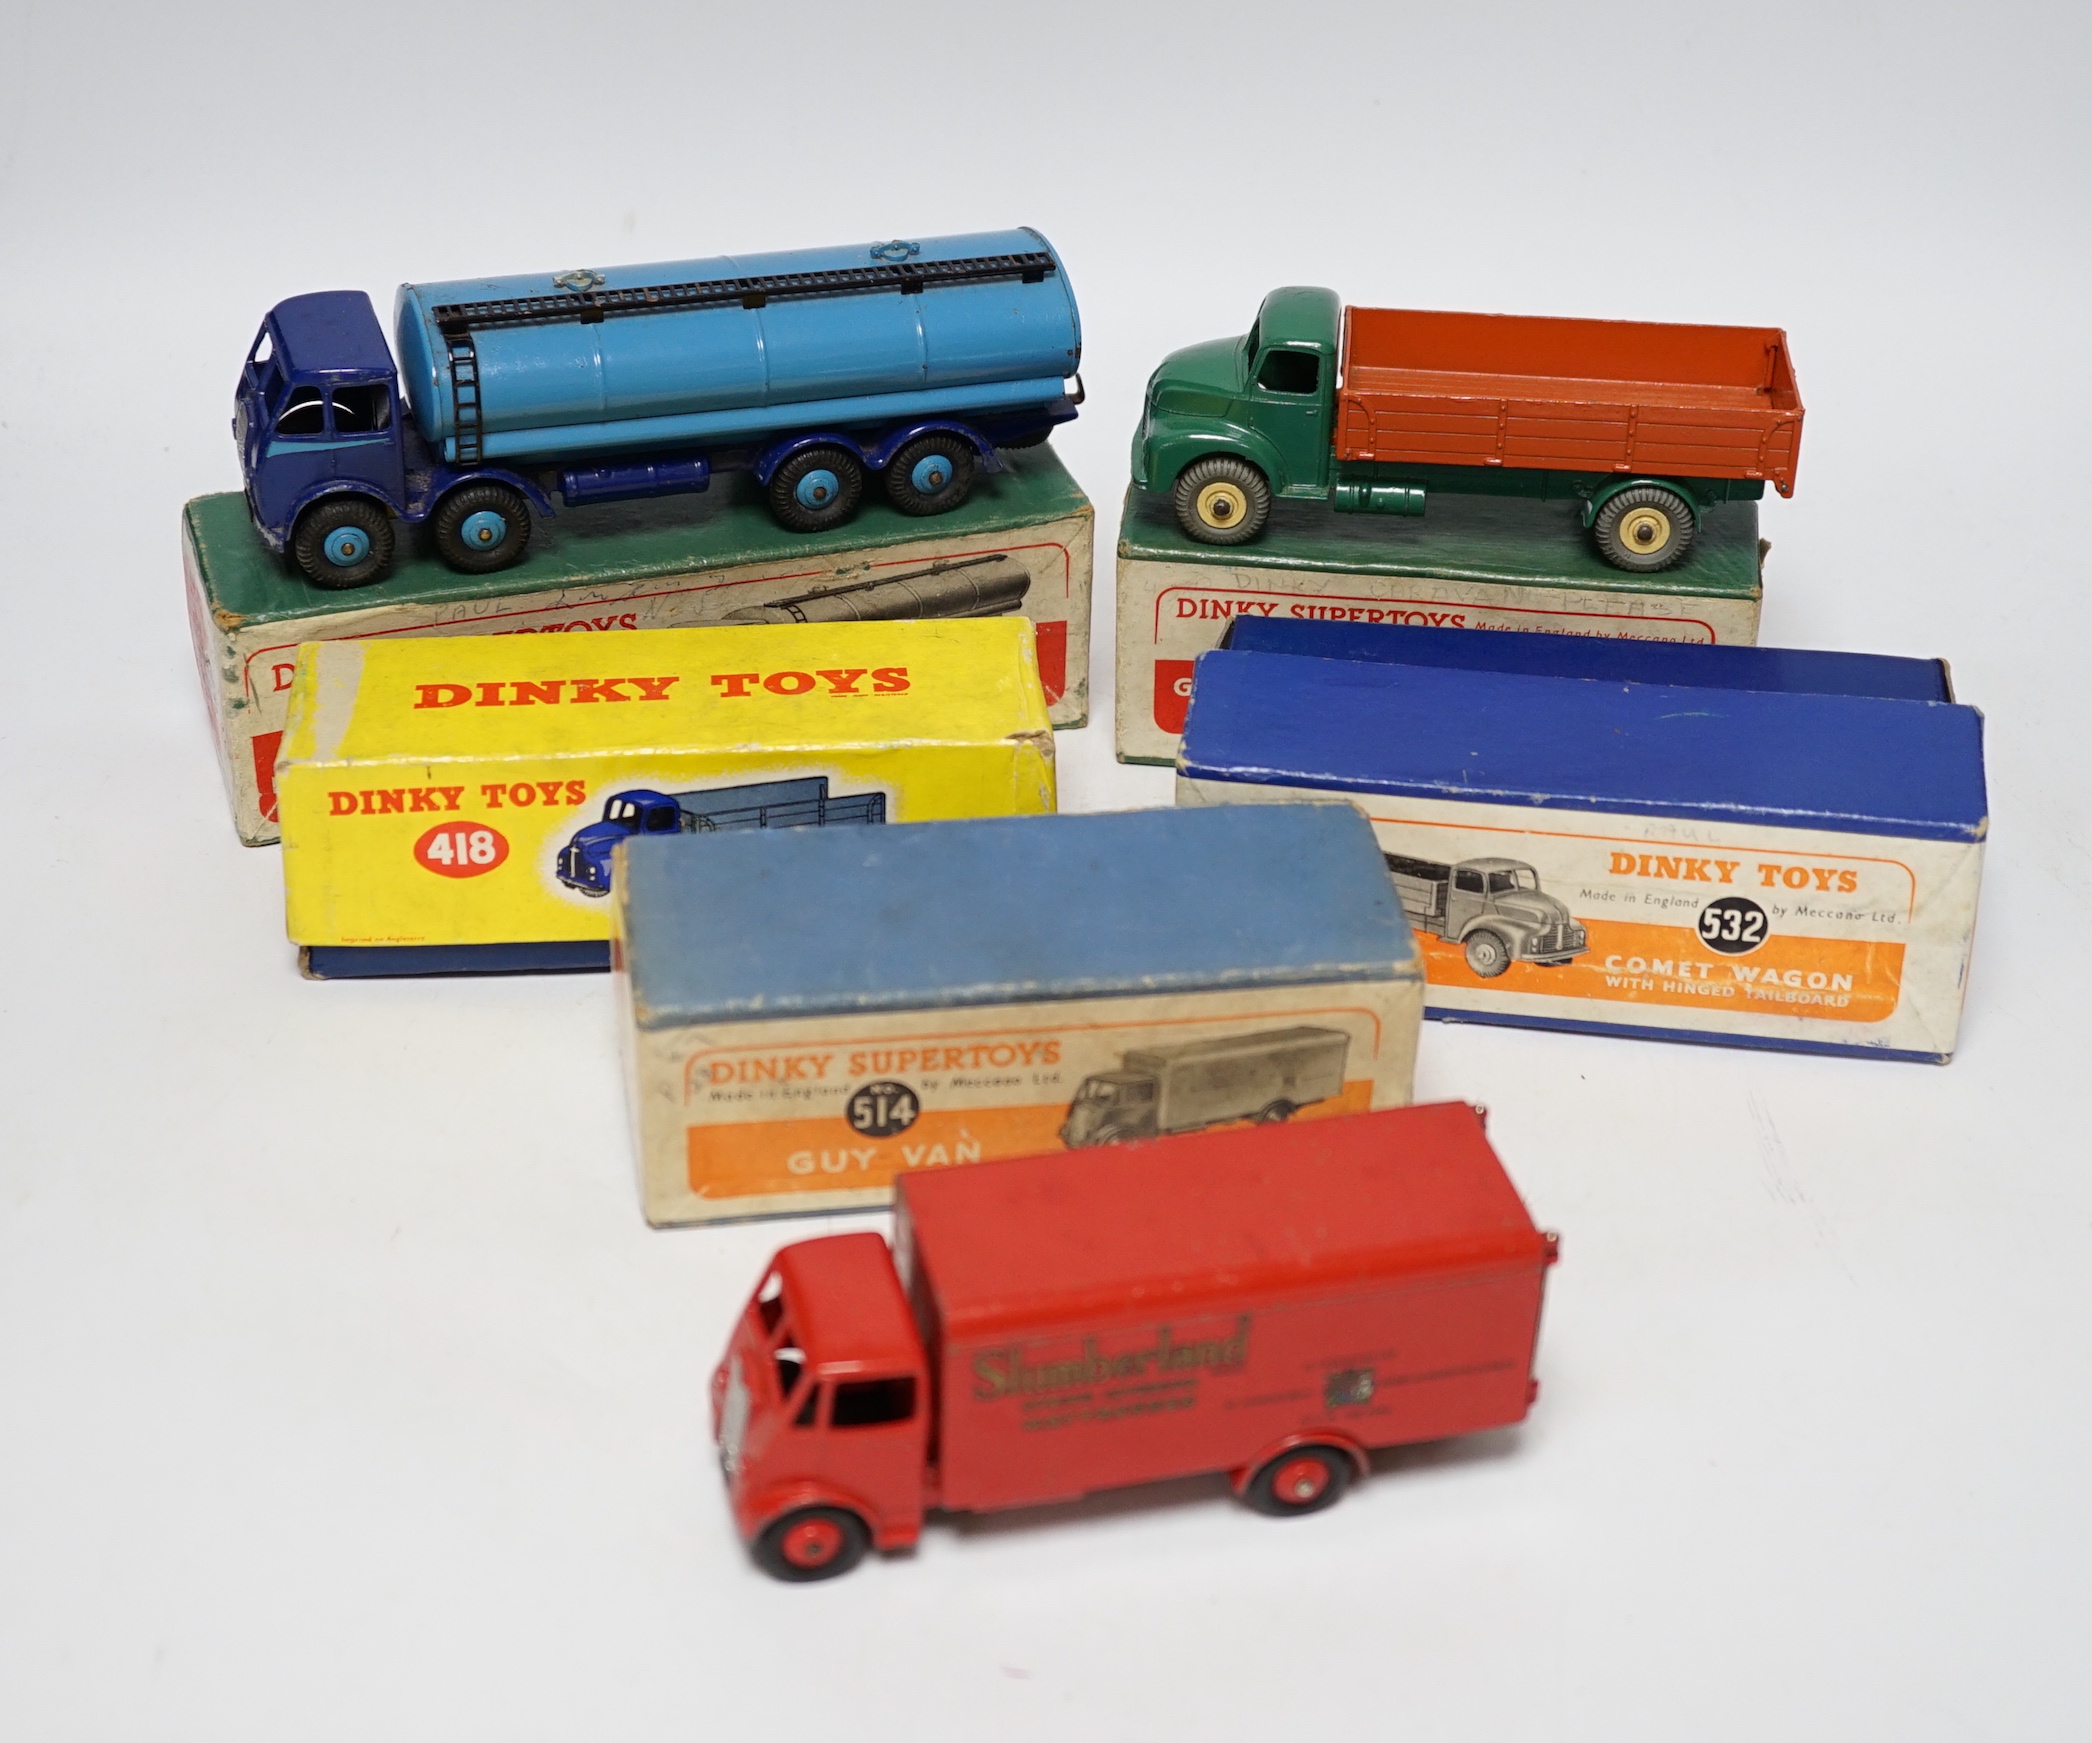 Three boxed Dinky Supertoys; (514) a Guy Slumberland Van, (504) a Foden 14 ton Tanker, and a (532) Comet Wagon with hinged tailboard, together with two useful empty boxes for a second Comet Wagon (418) and a Guy 4 ton Lo